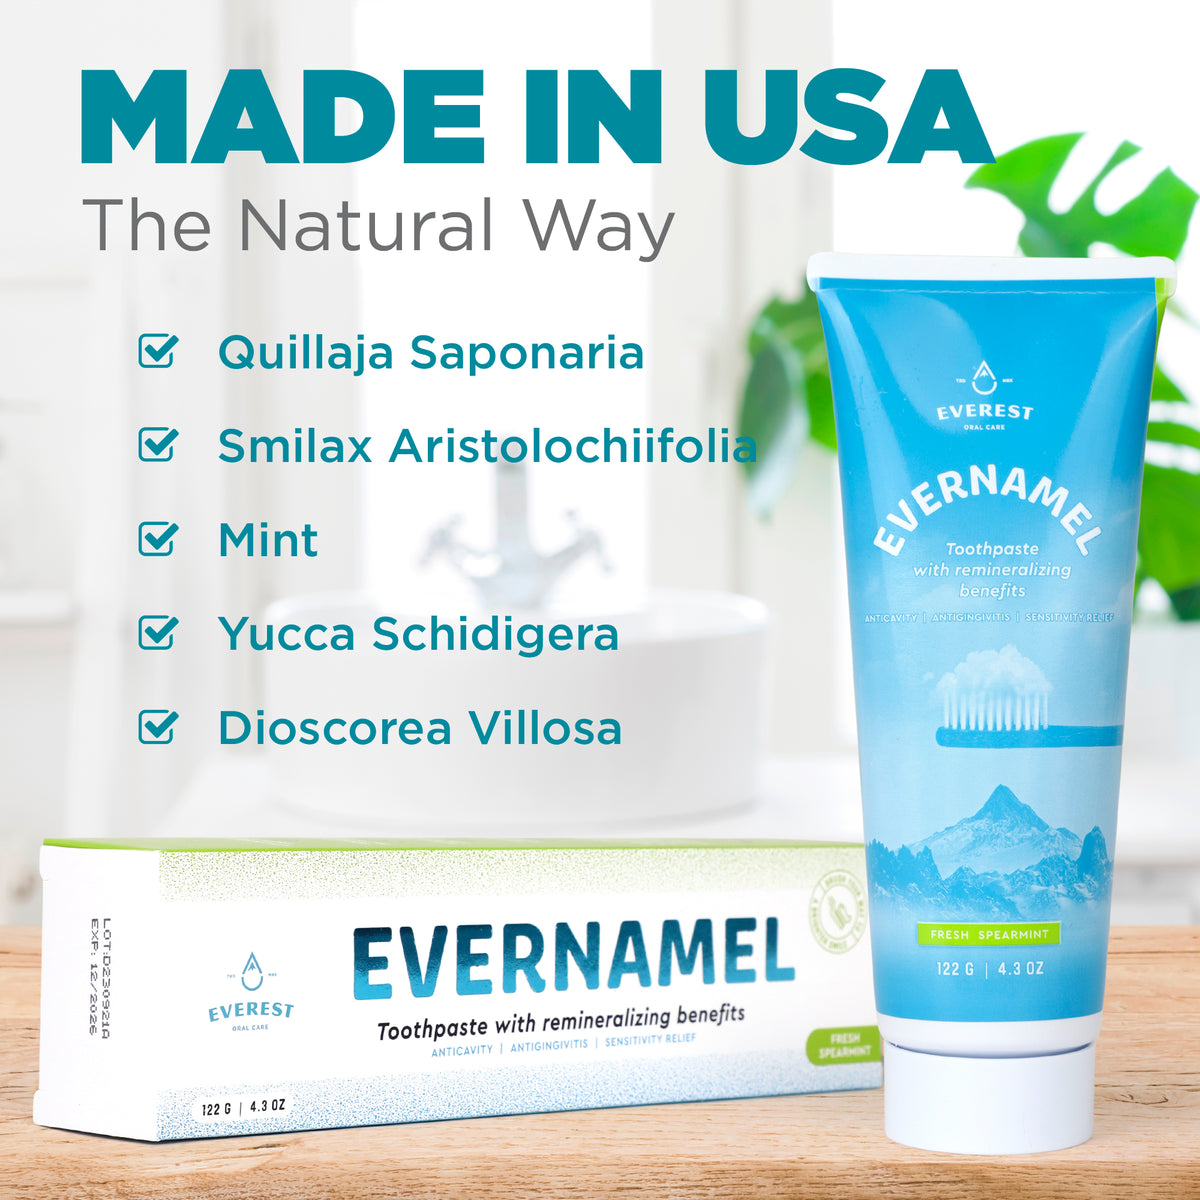 New! EVERNAMEL Remineralizing Toothpaste